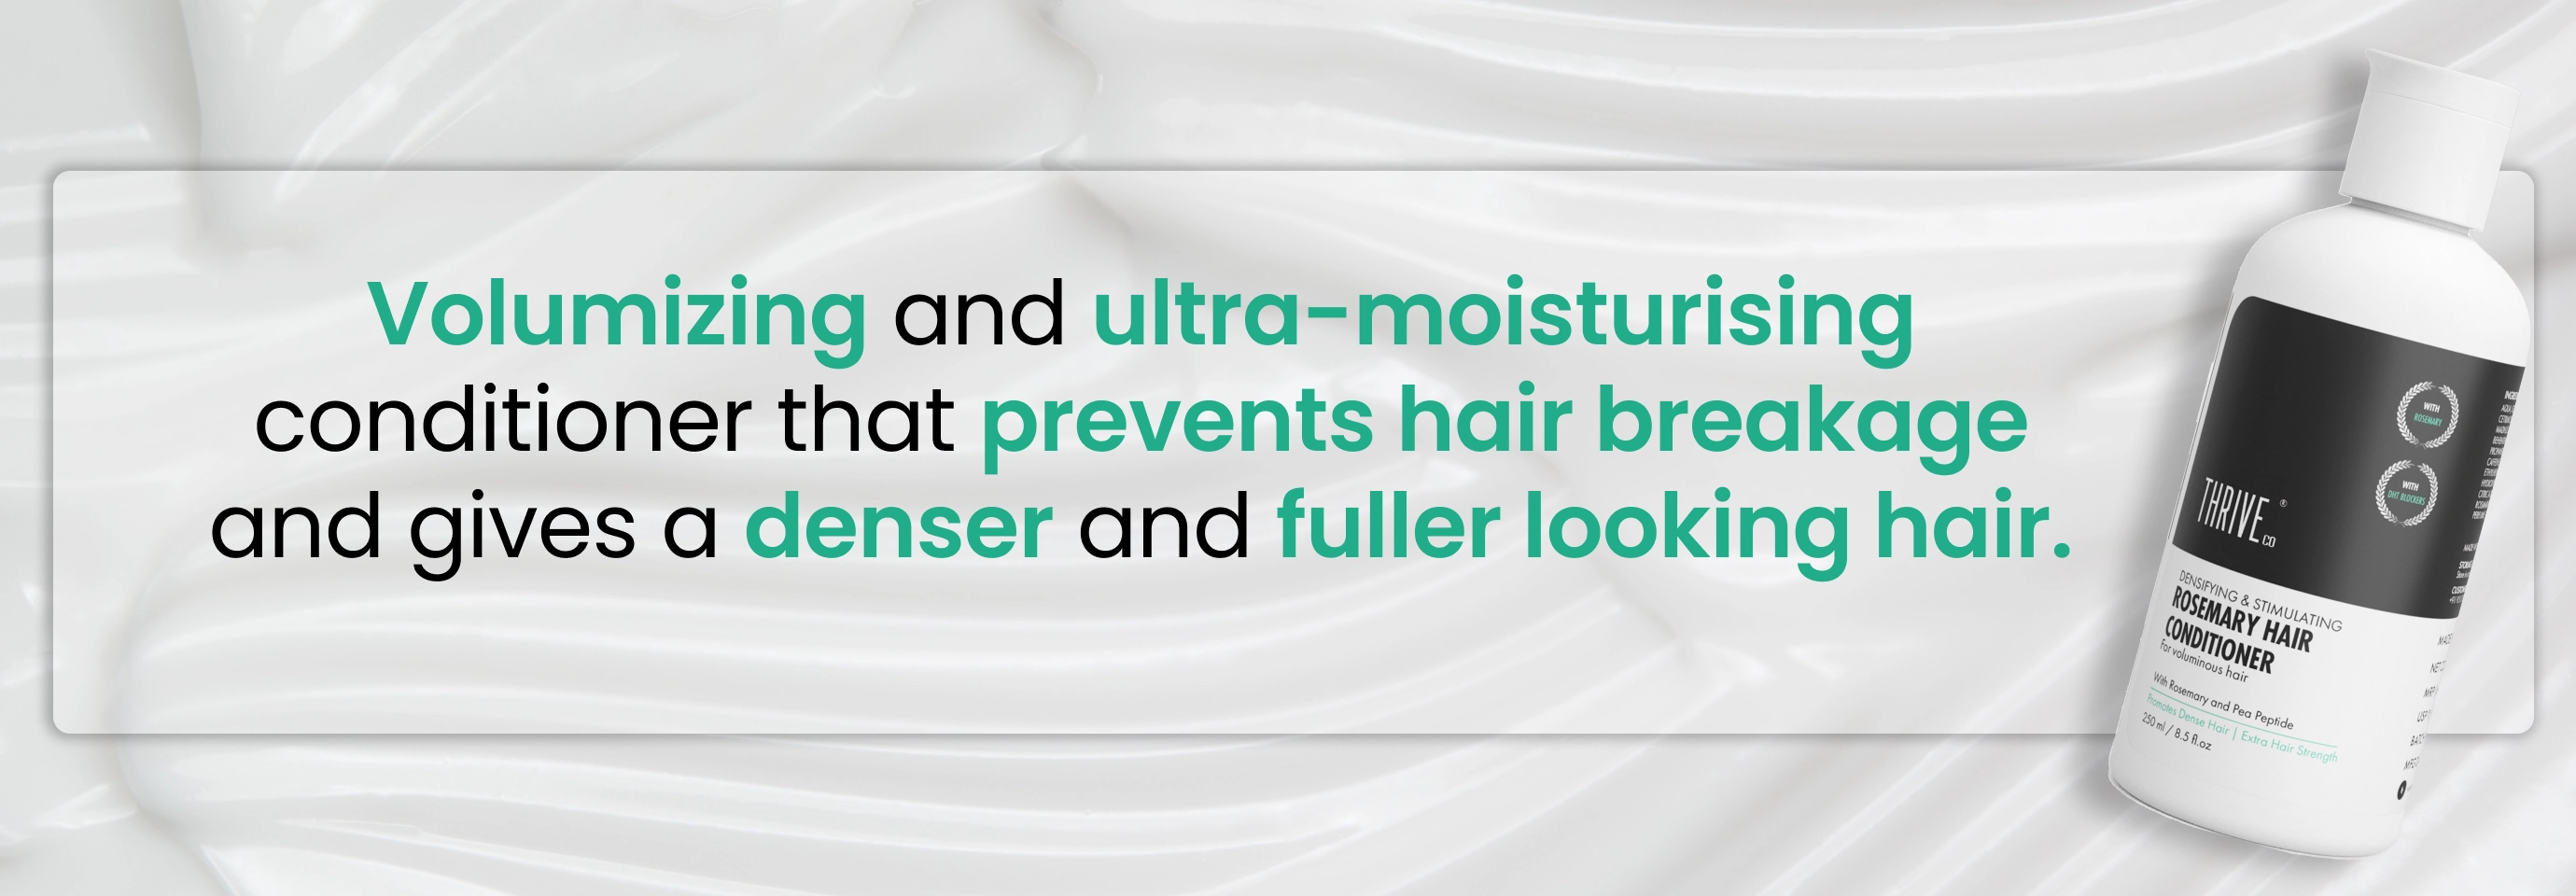 get denser, fuller-looking hair with ThriveCo ultra-moisturizing & volumizing conditioner